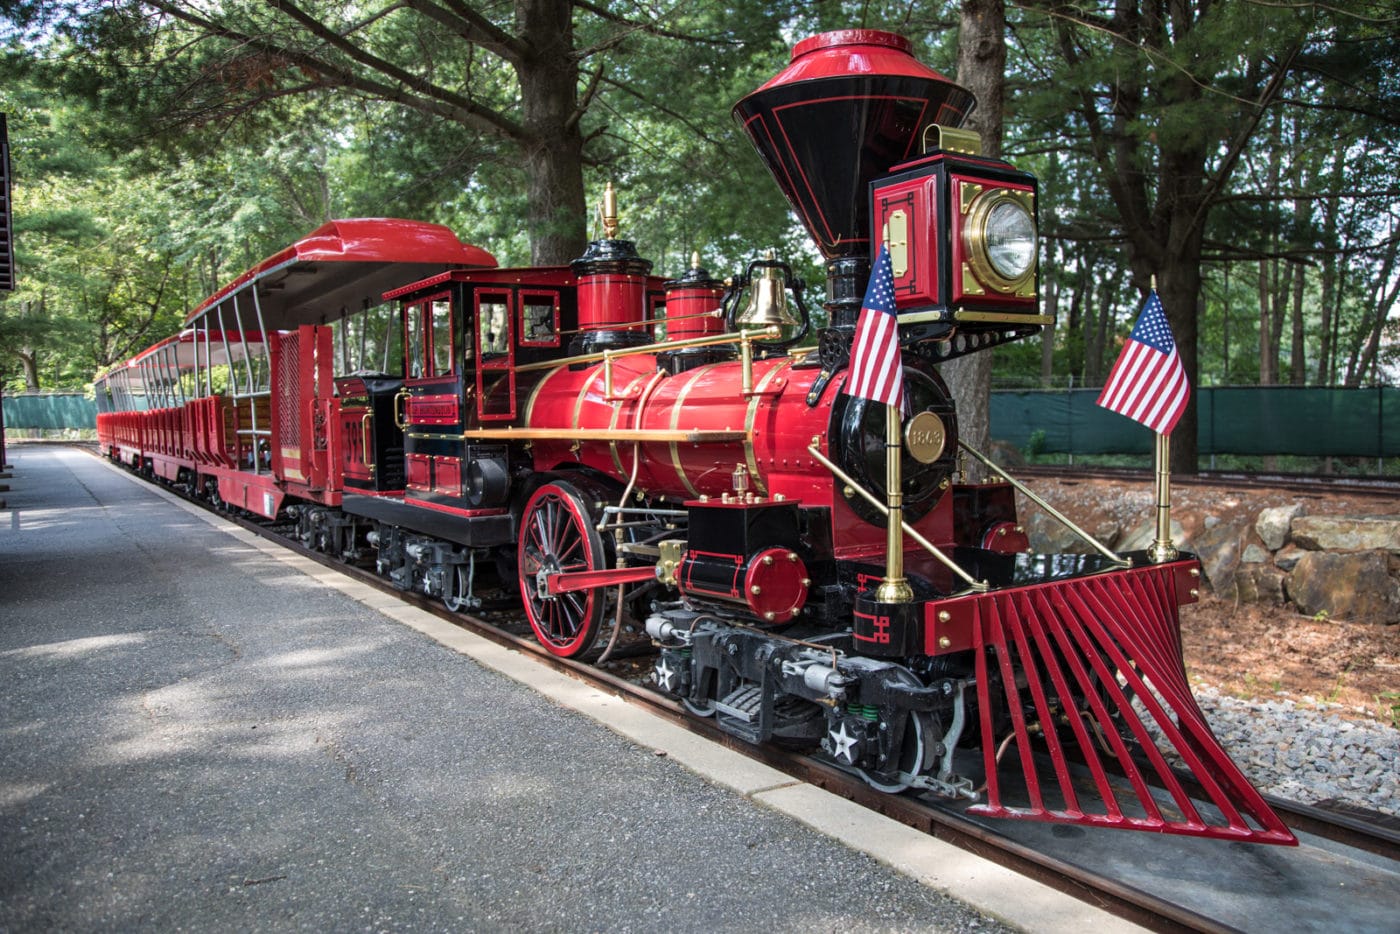 A scale replica of a steam locomotive for children to ride at an outdoor museum.